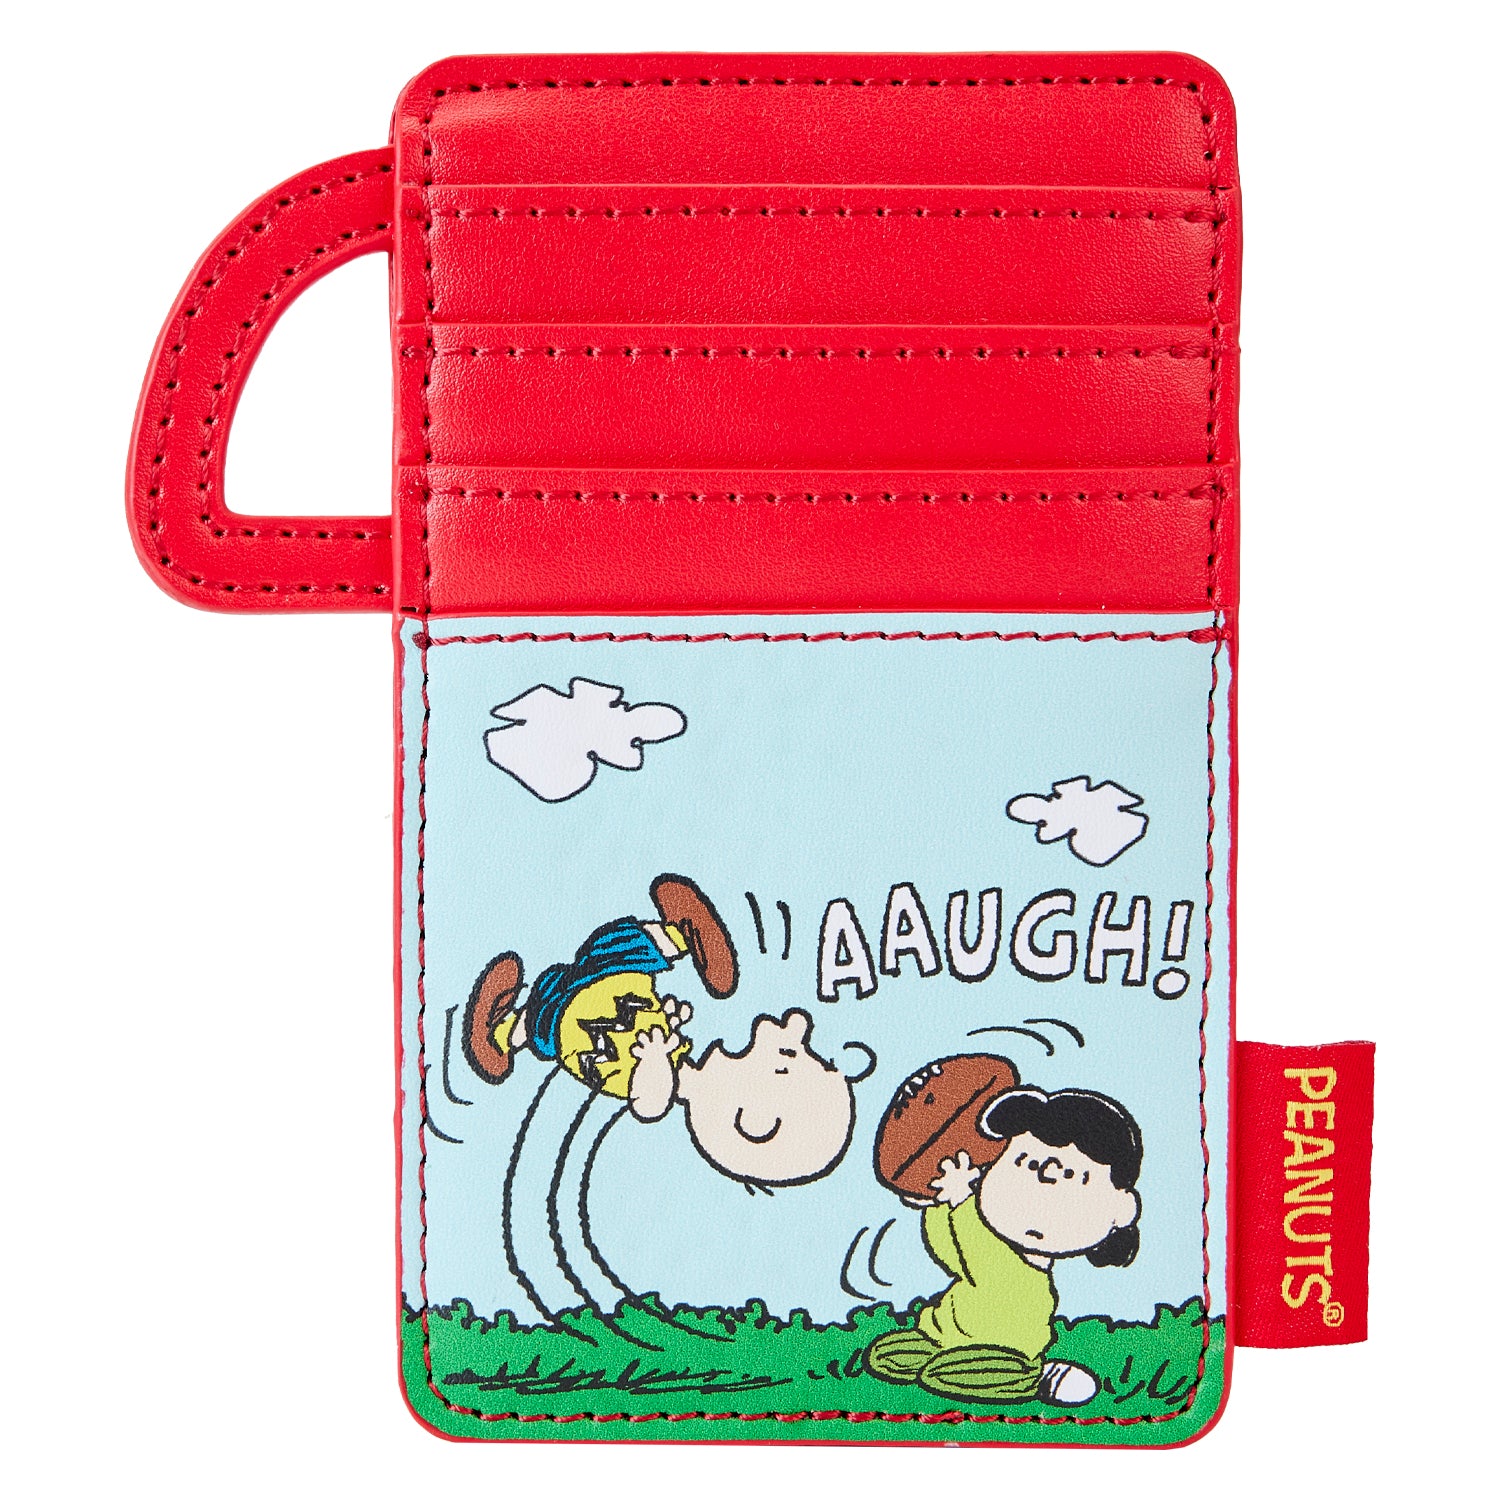 Peanuts | Charlie Brown Thermos Cardholder